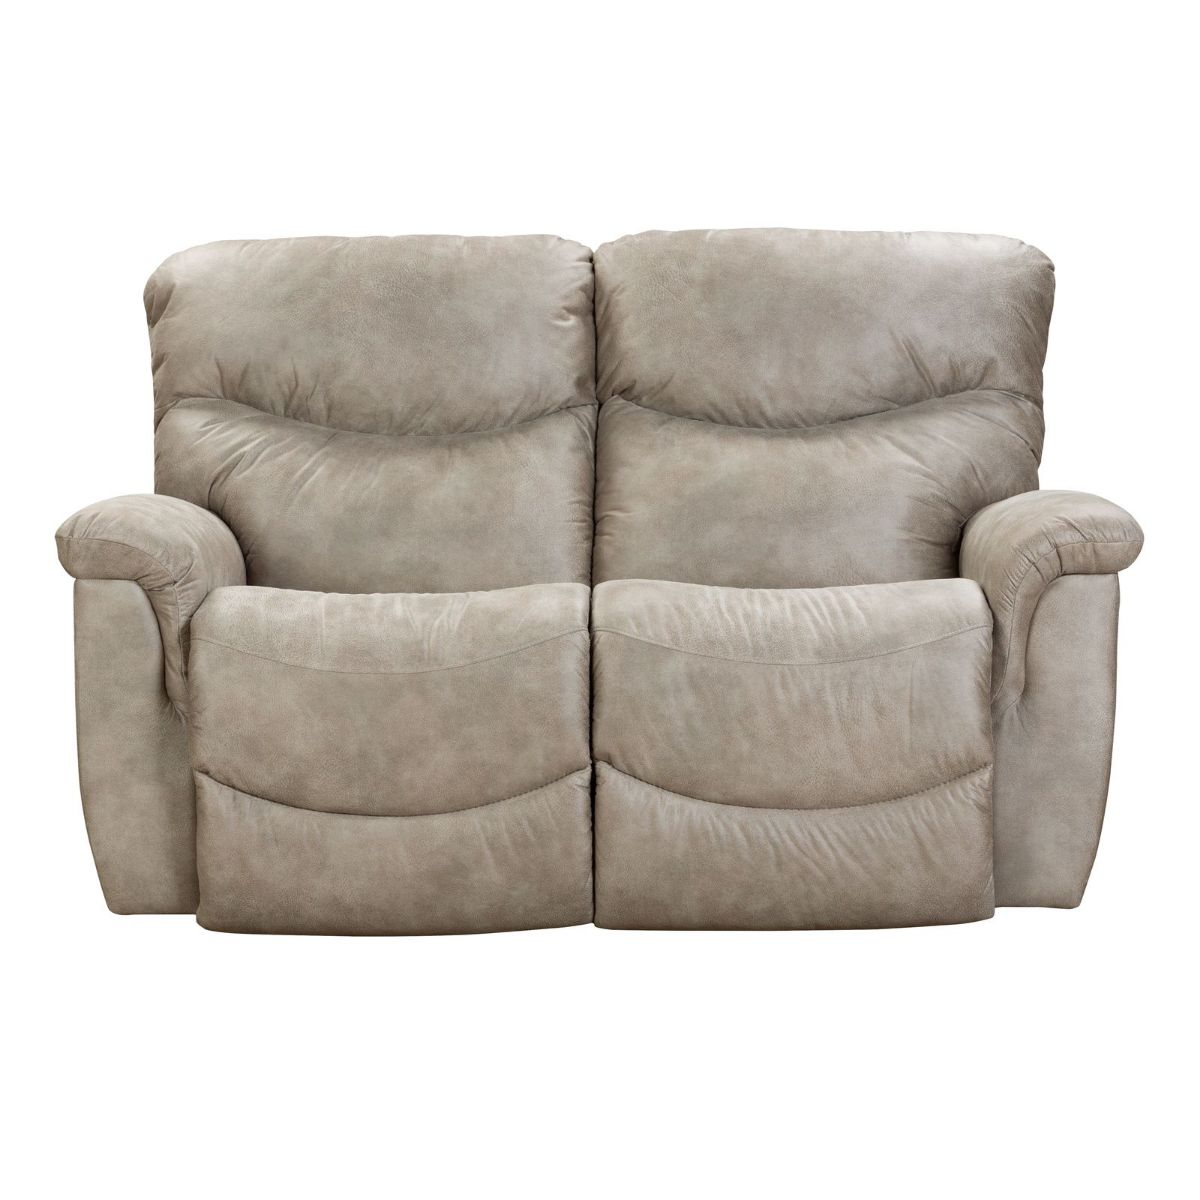 Picture of James Pebble Power Recliner Loveseat